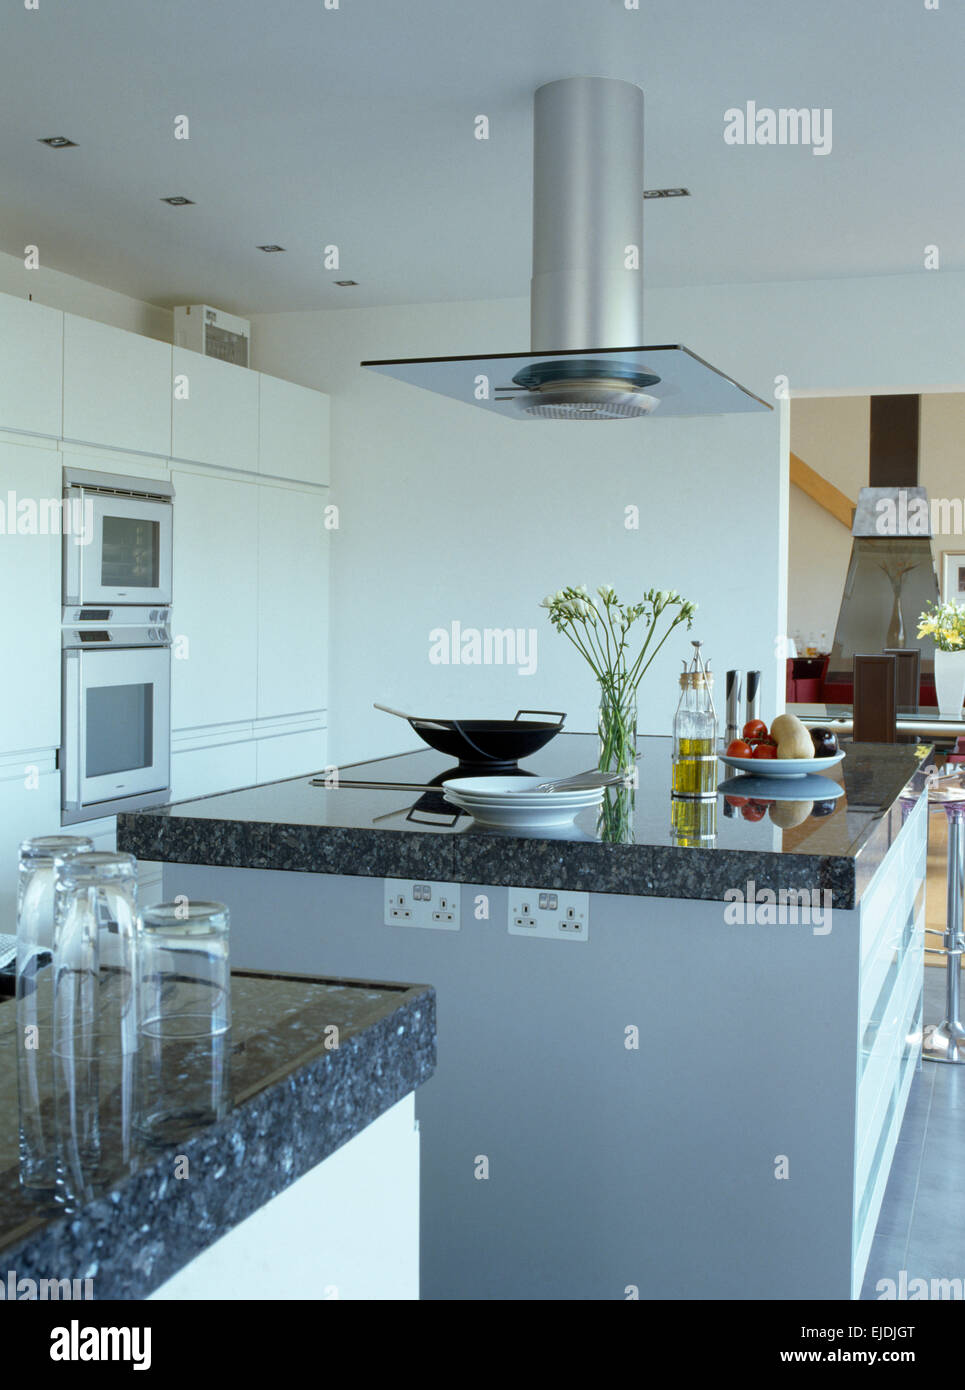 Chrome extractor above granite topped island unit in modern kitchen Stock Photo